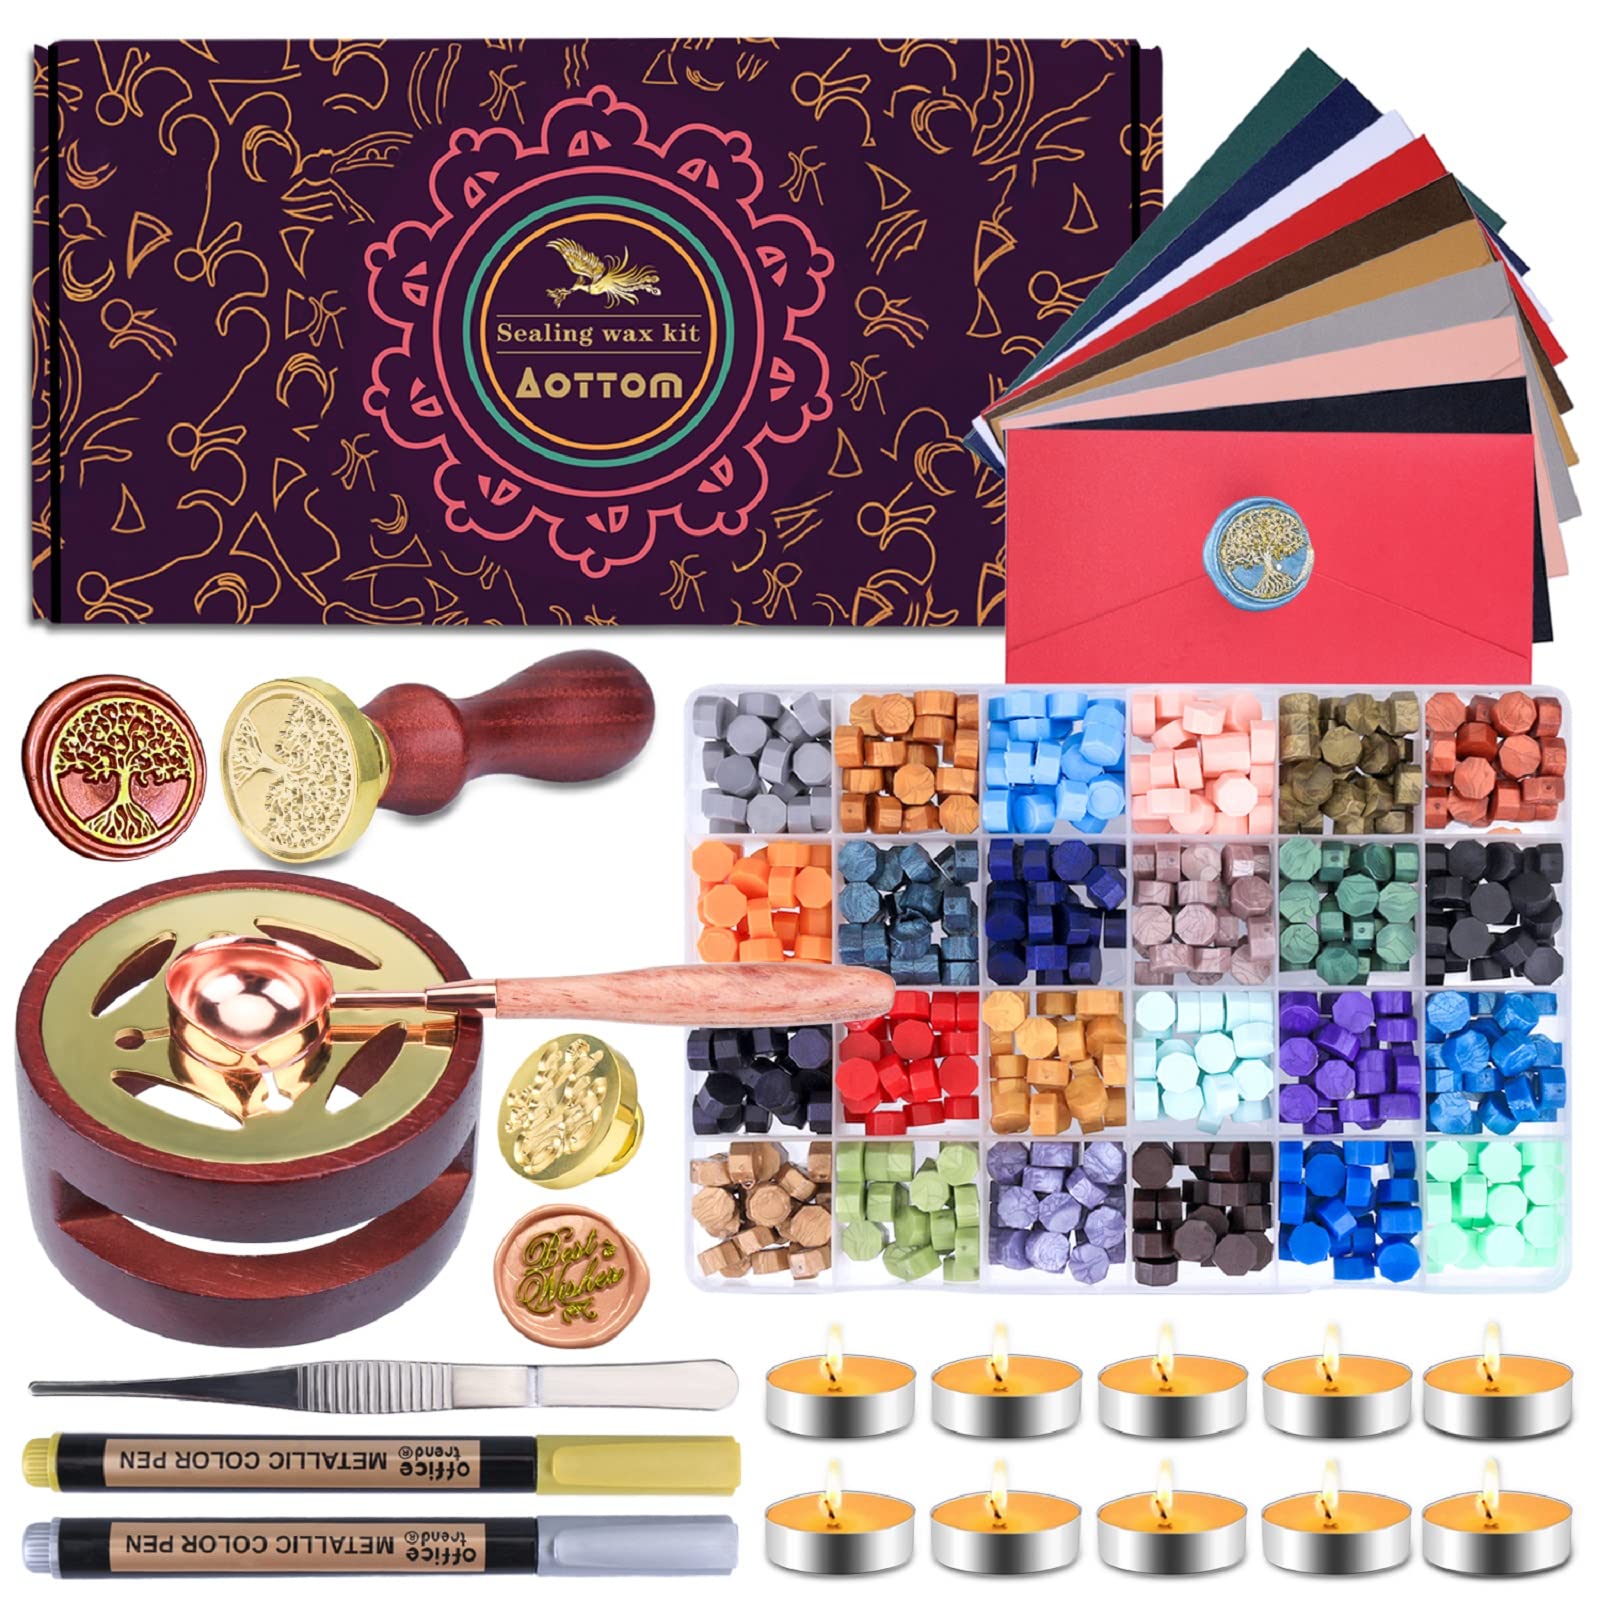 Wax Seal Stamp Kit with Gift Box Aottom Wax Letter Seal Kit with 24 Colors  650 Pcs Wax Seal Beads Sealing Wax Warmer Envelopes Candles Wax Stamp  Metallic Pen Wax Seal Kit